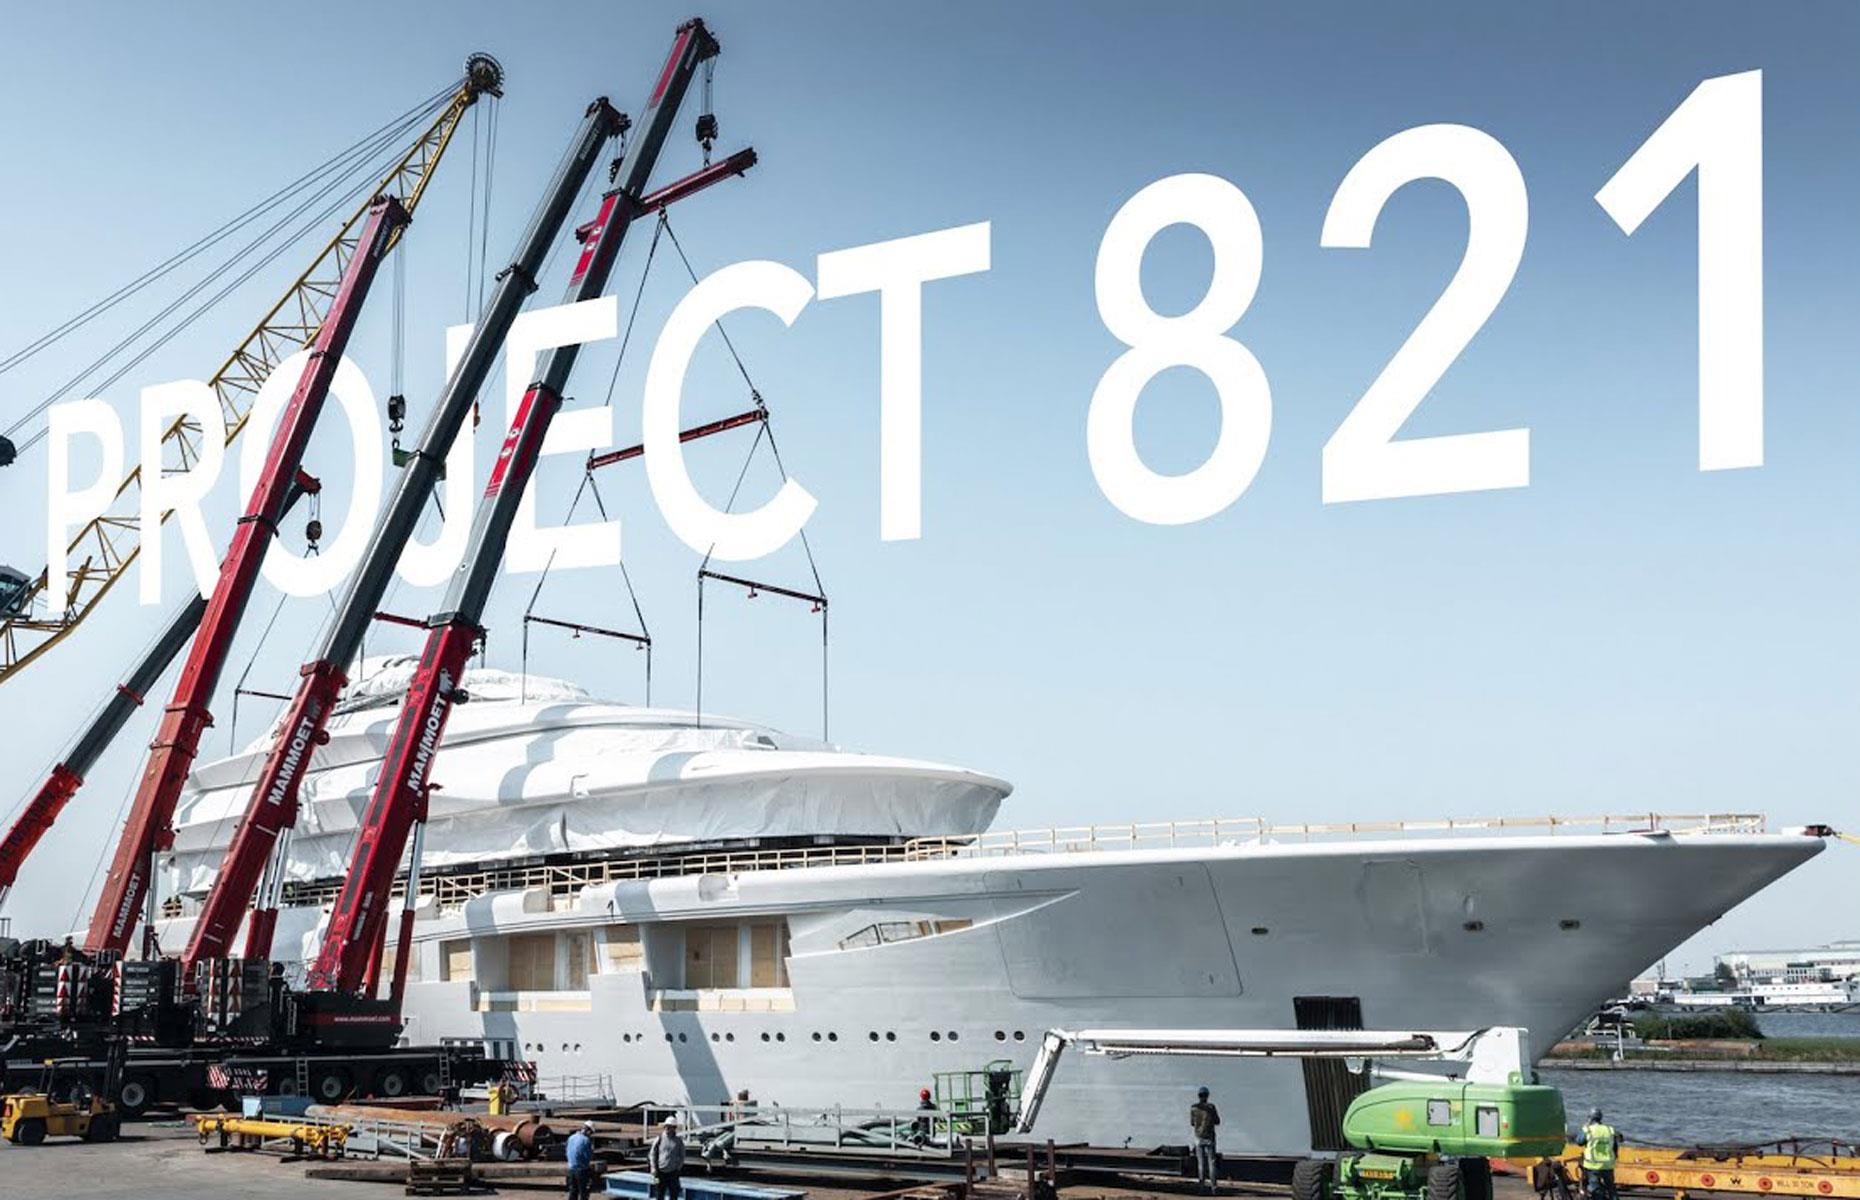 <p>The biggest Feadship superyacht launching this year – not to mention the largest the Dutch company has ever built – is <em>Project 821</em>, which spans 390 feet (119m).</p>  <p>Feadship is being as secretive about this superyacht as it is with <em>Project 1012</em>, with very few details known about it. </p>